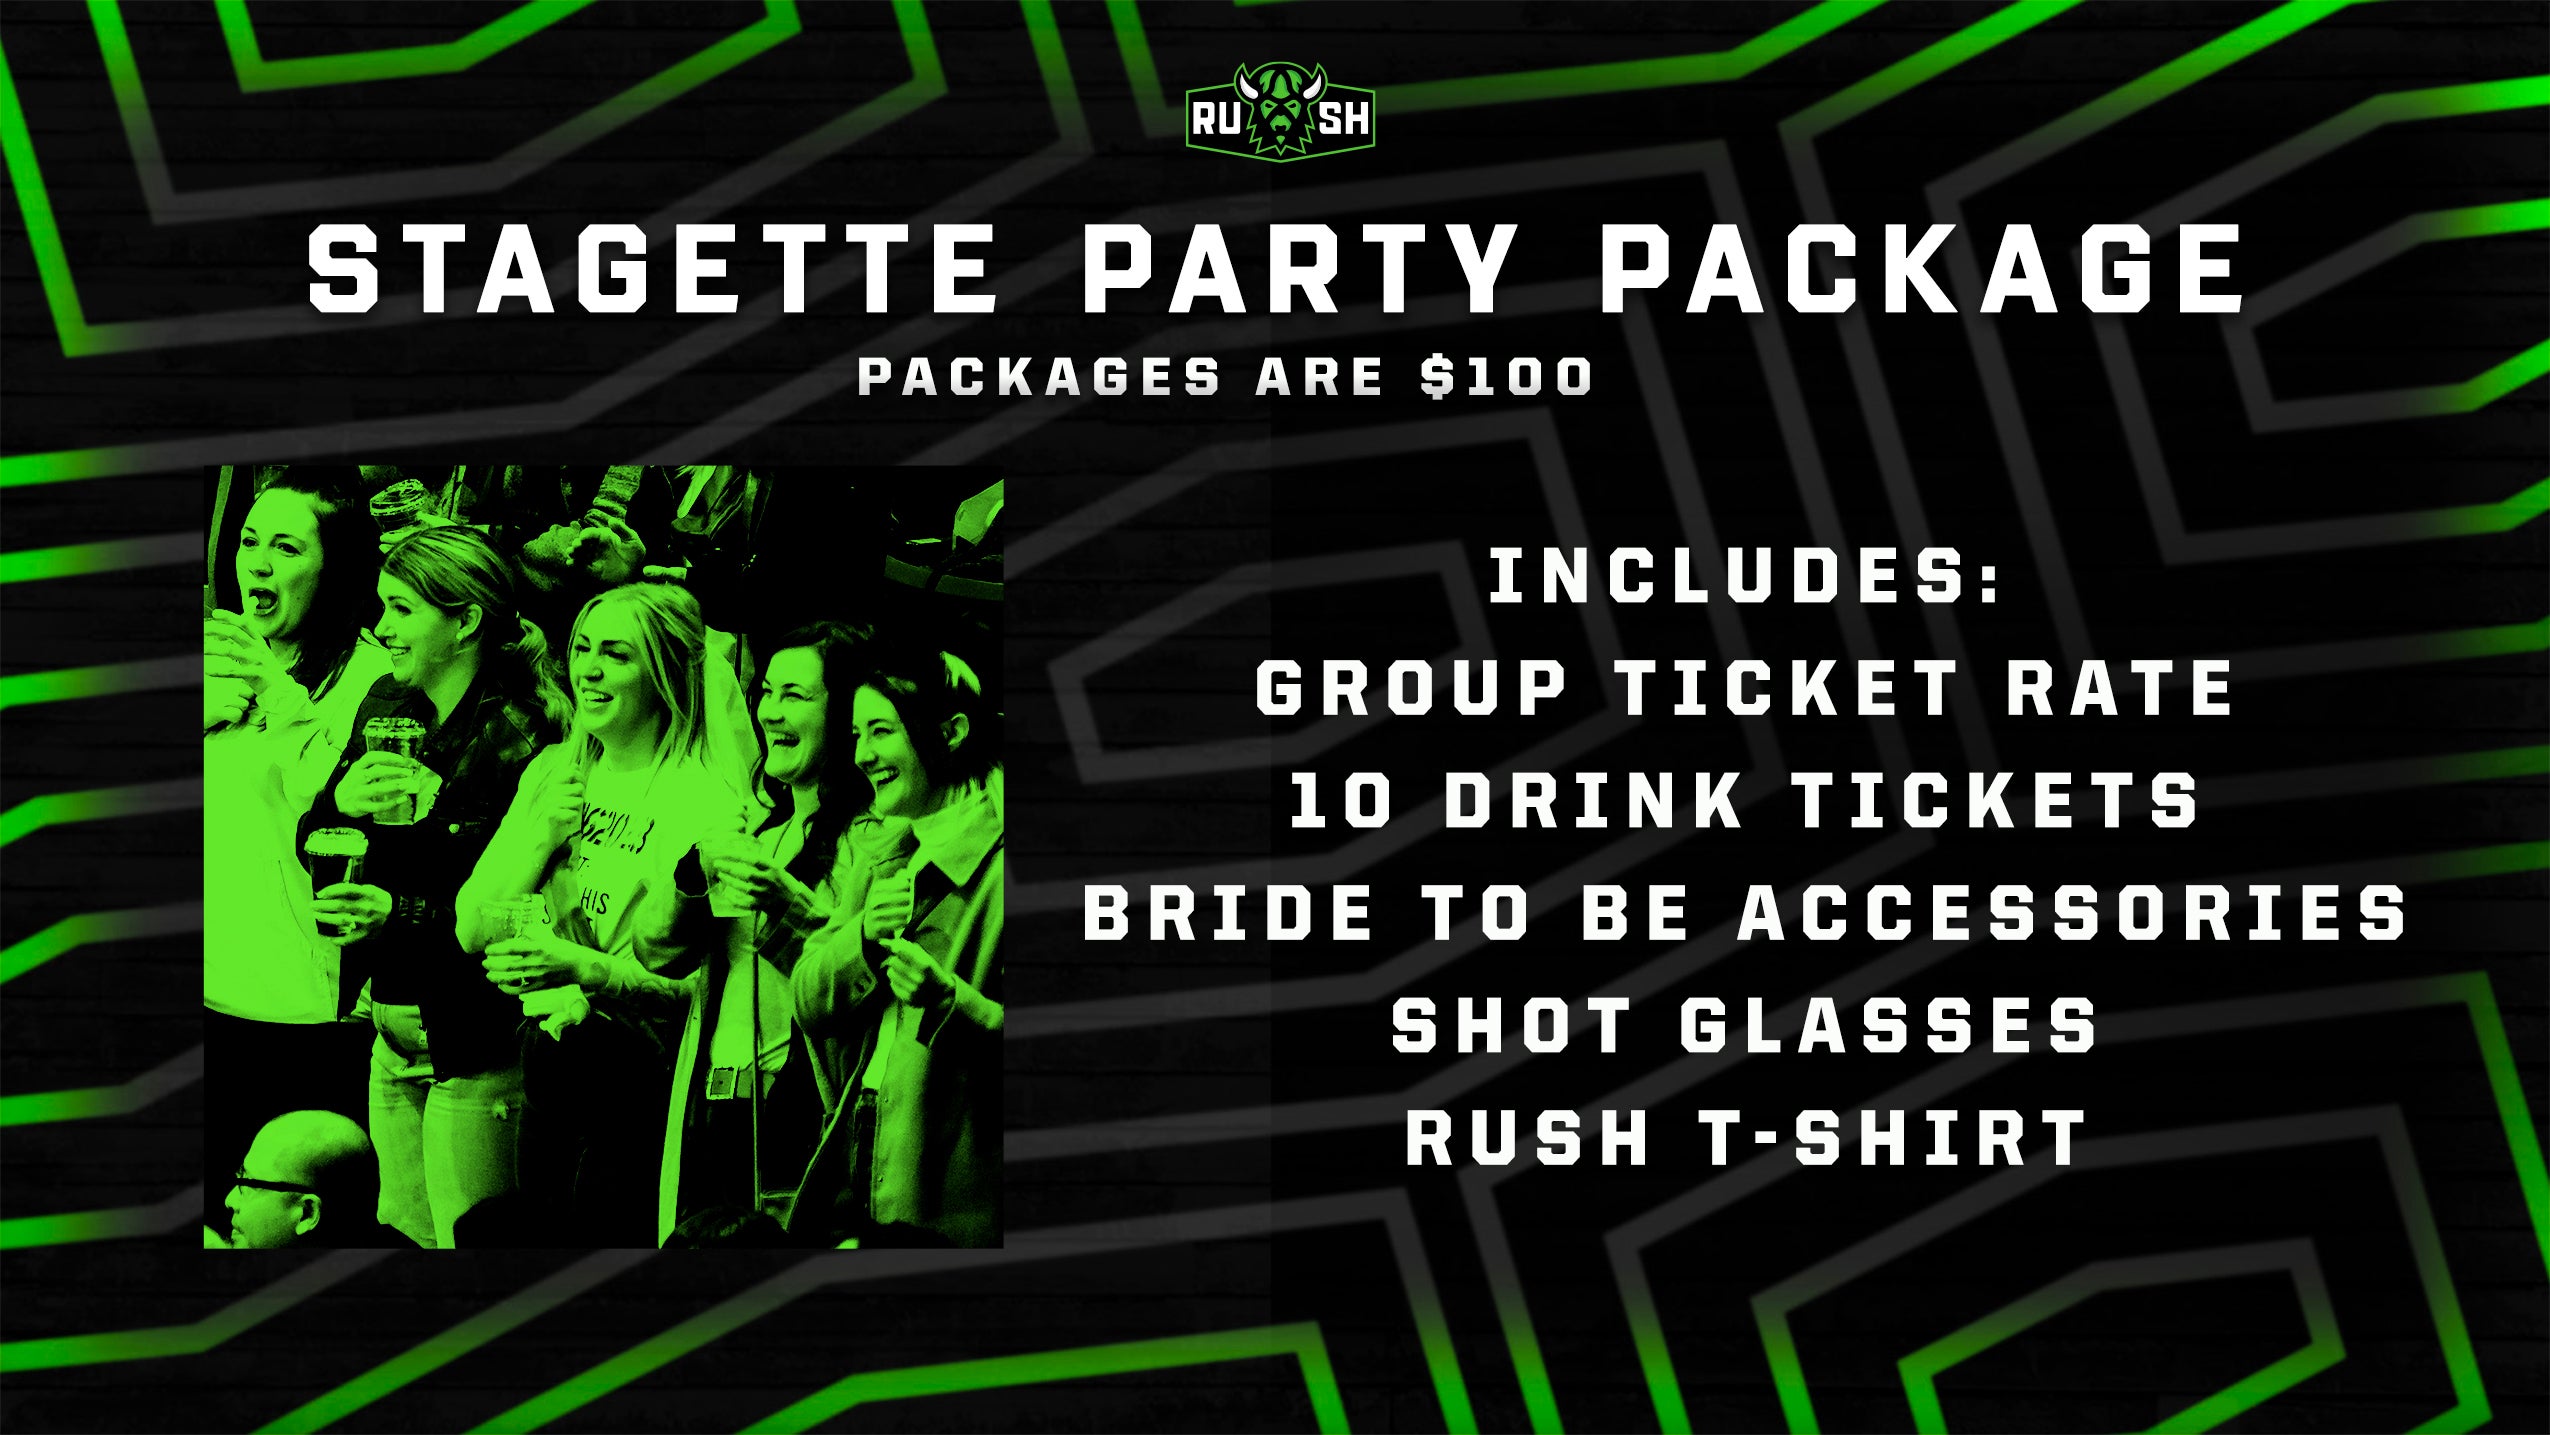 Stagette Party Package.jpg